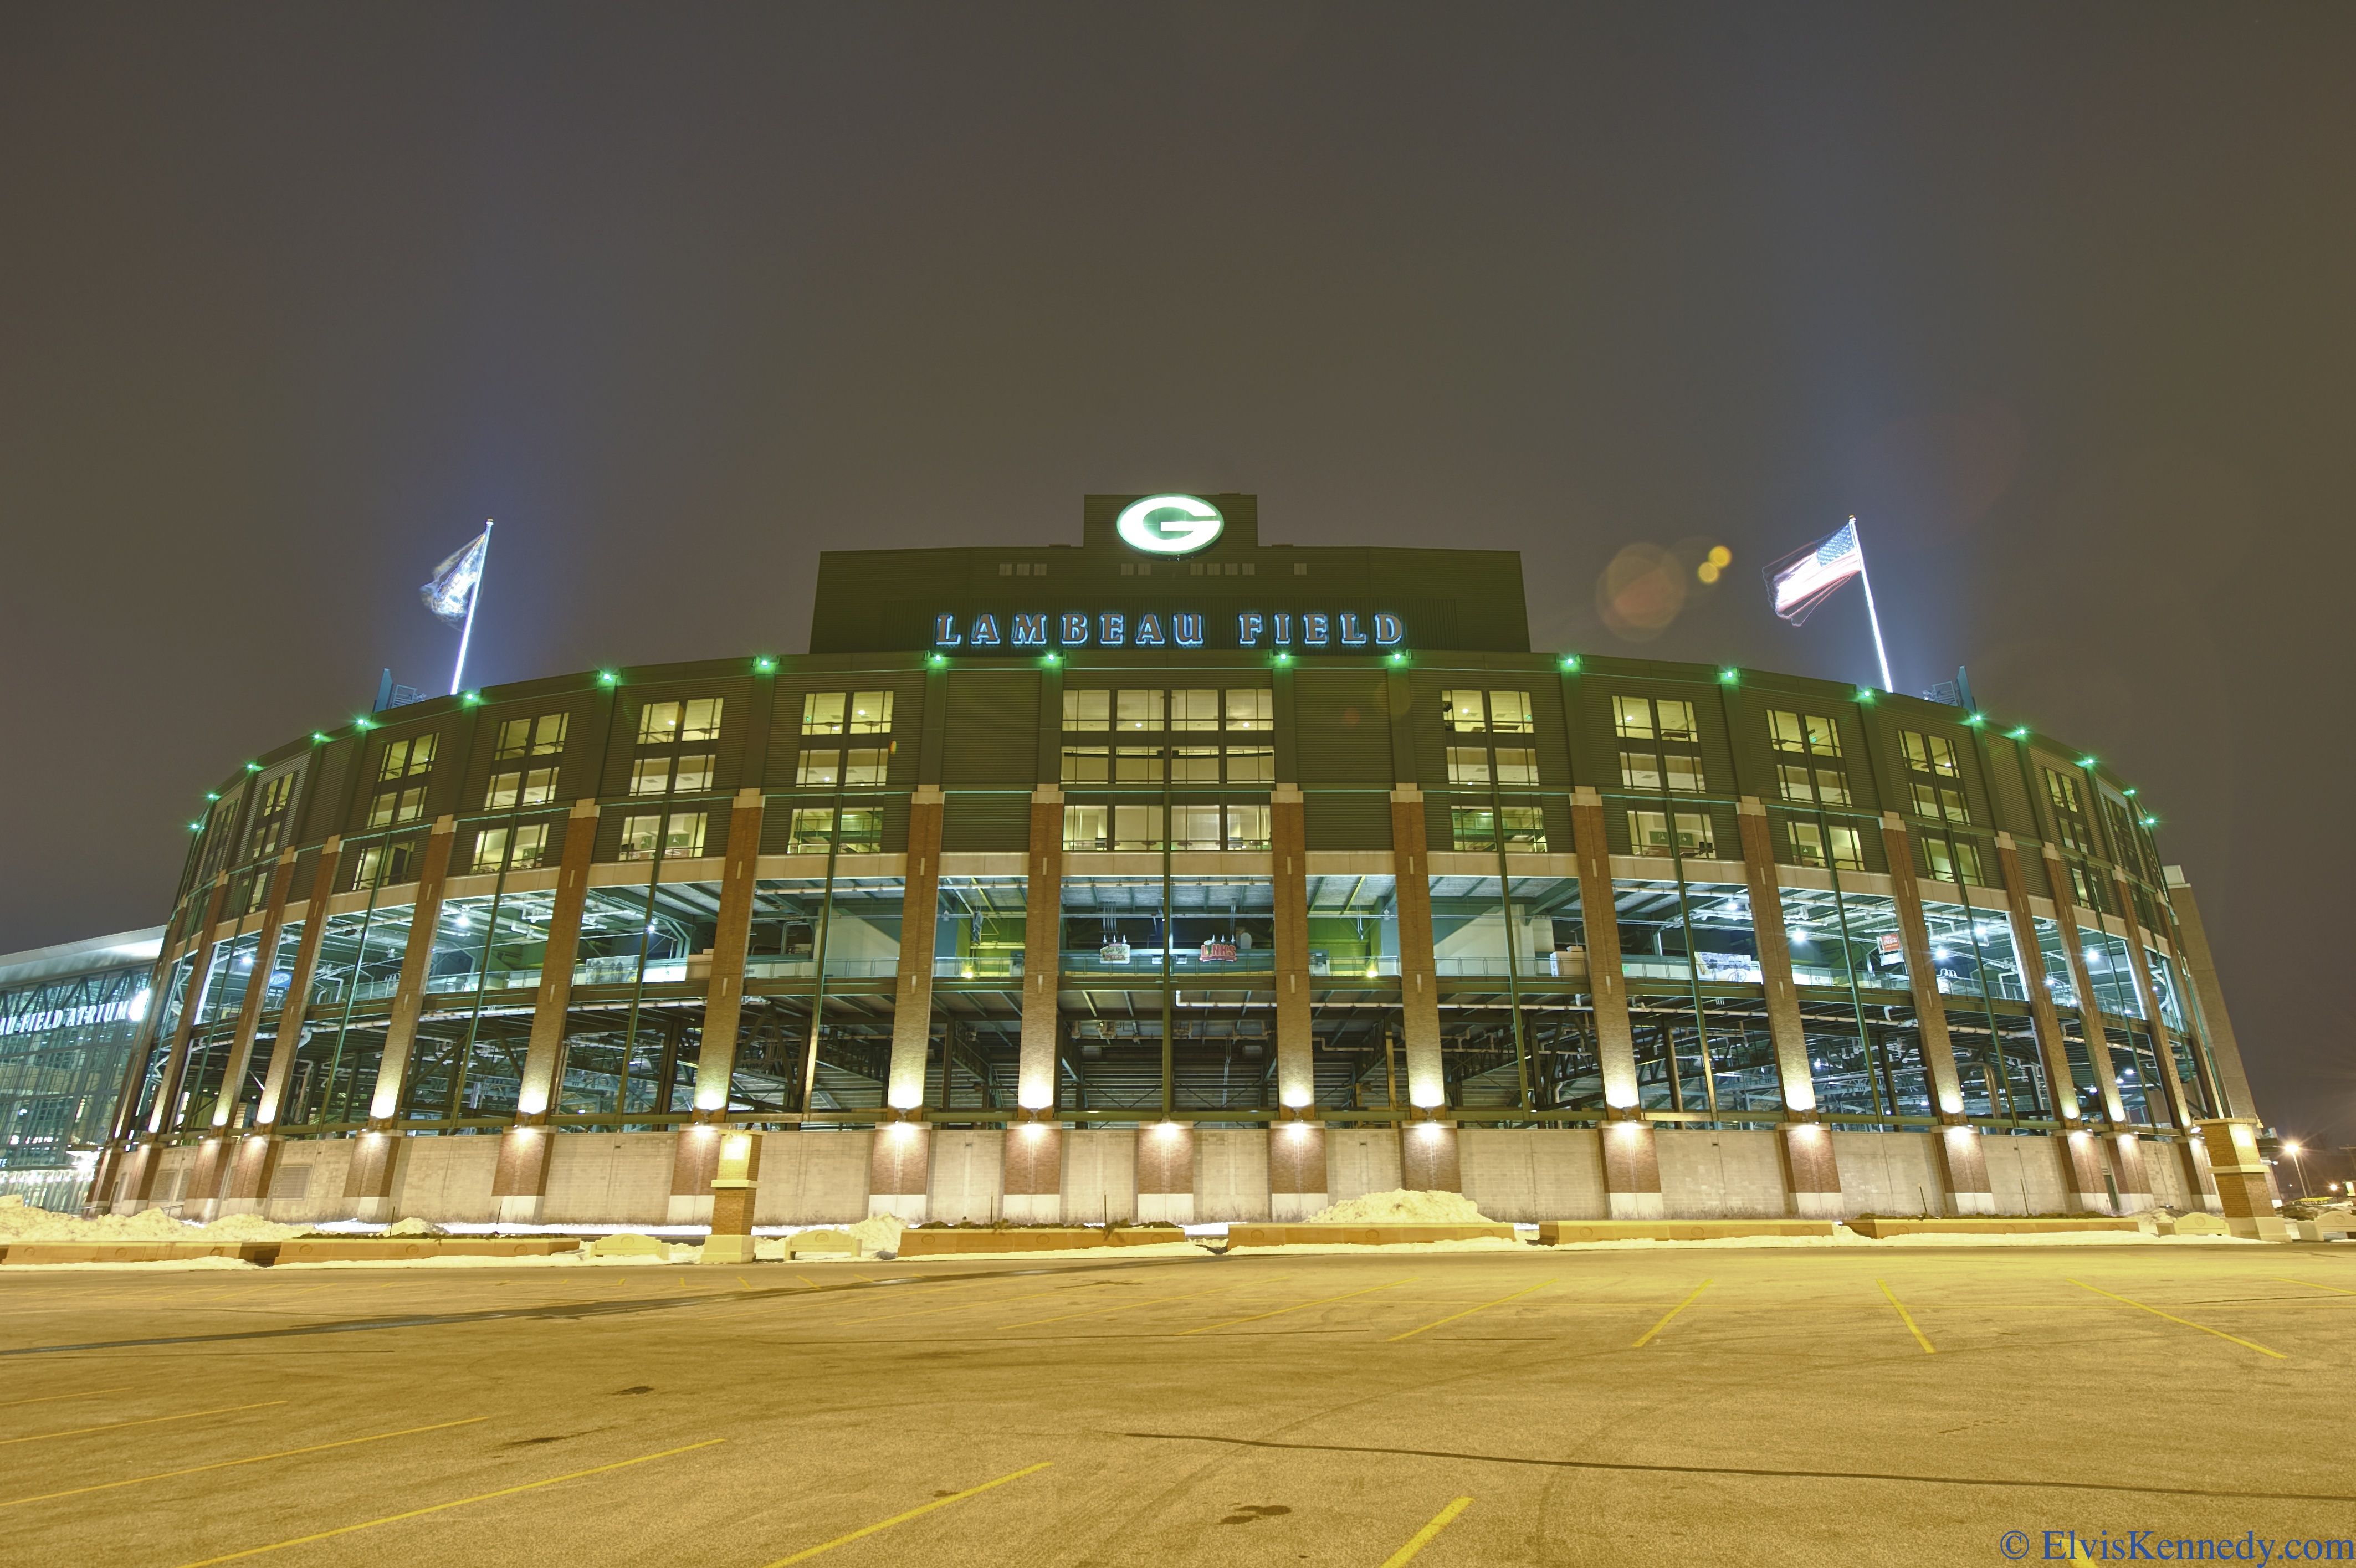 What City Is The Green Bay Packers Stadium Discloses Next